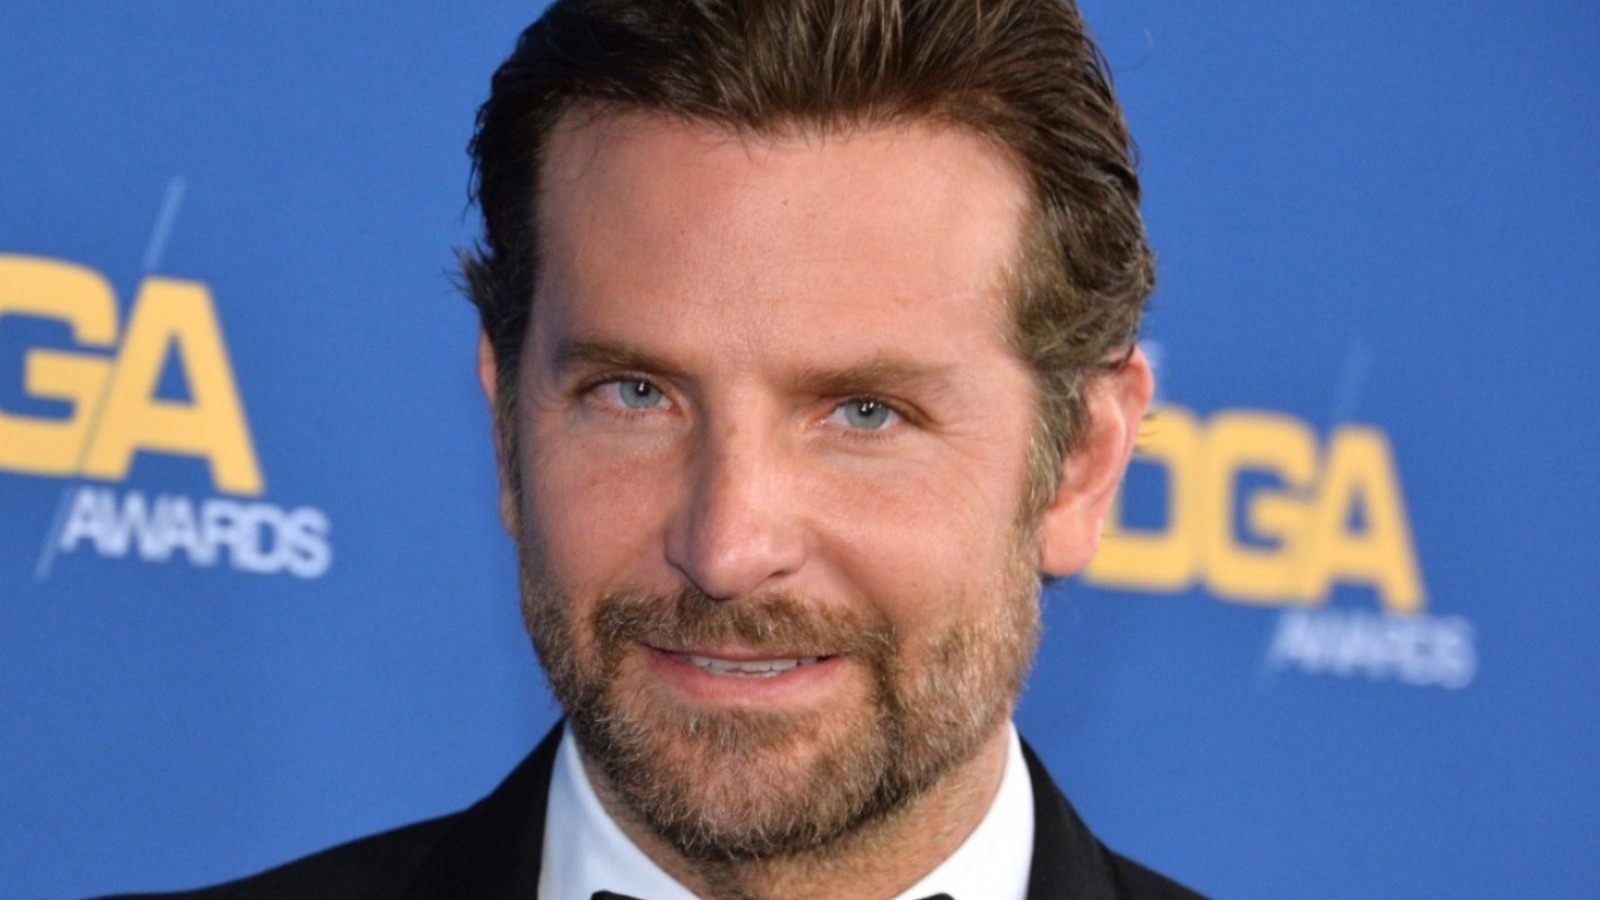 How Much Bradley Cooper Will Be Involved In The Limitless TV Show